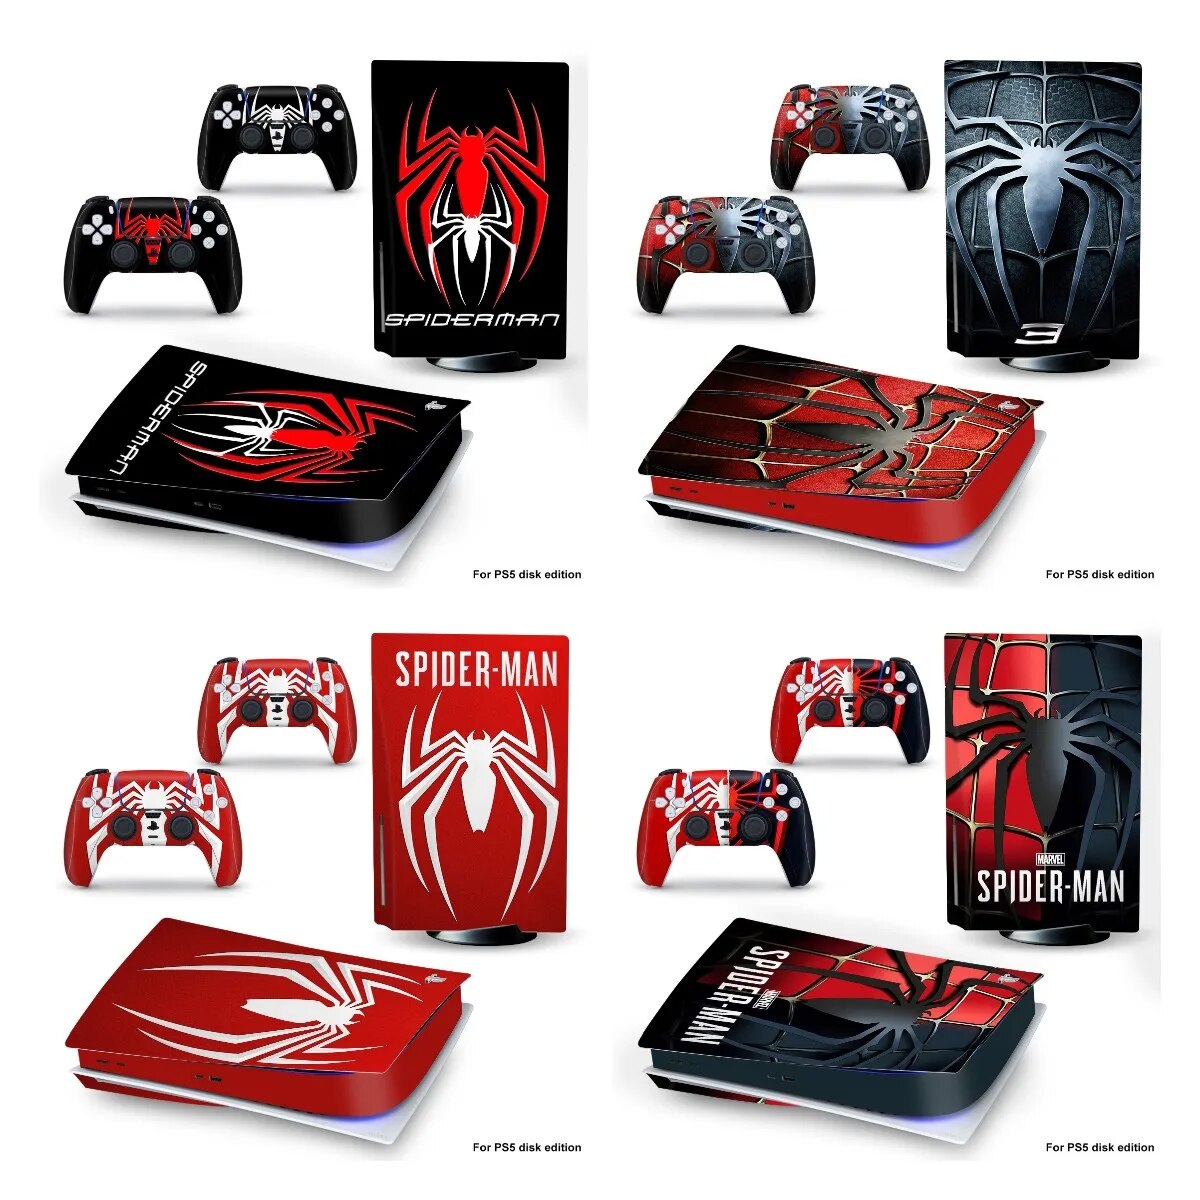 【Clearance】 Spider Man Ps5 Skin Sticker Vinyl Ps5 Disk Cd-Rom Skin Sticker Sticker For 5 Console And Controller All Inclusive